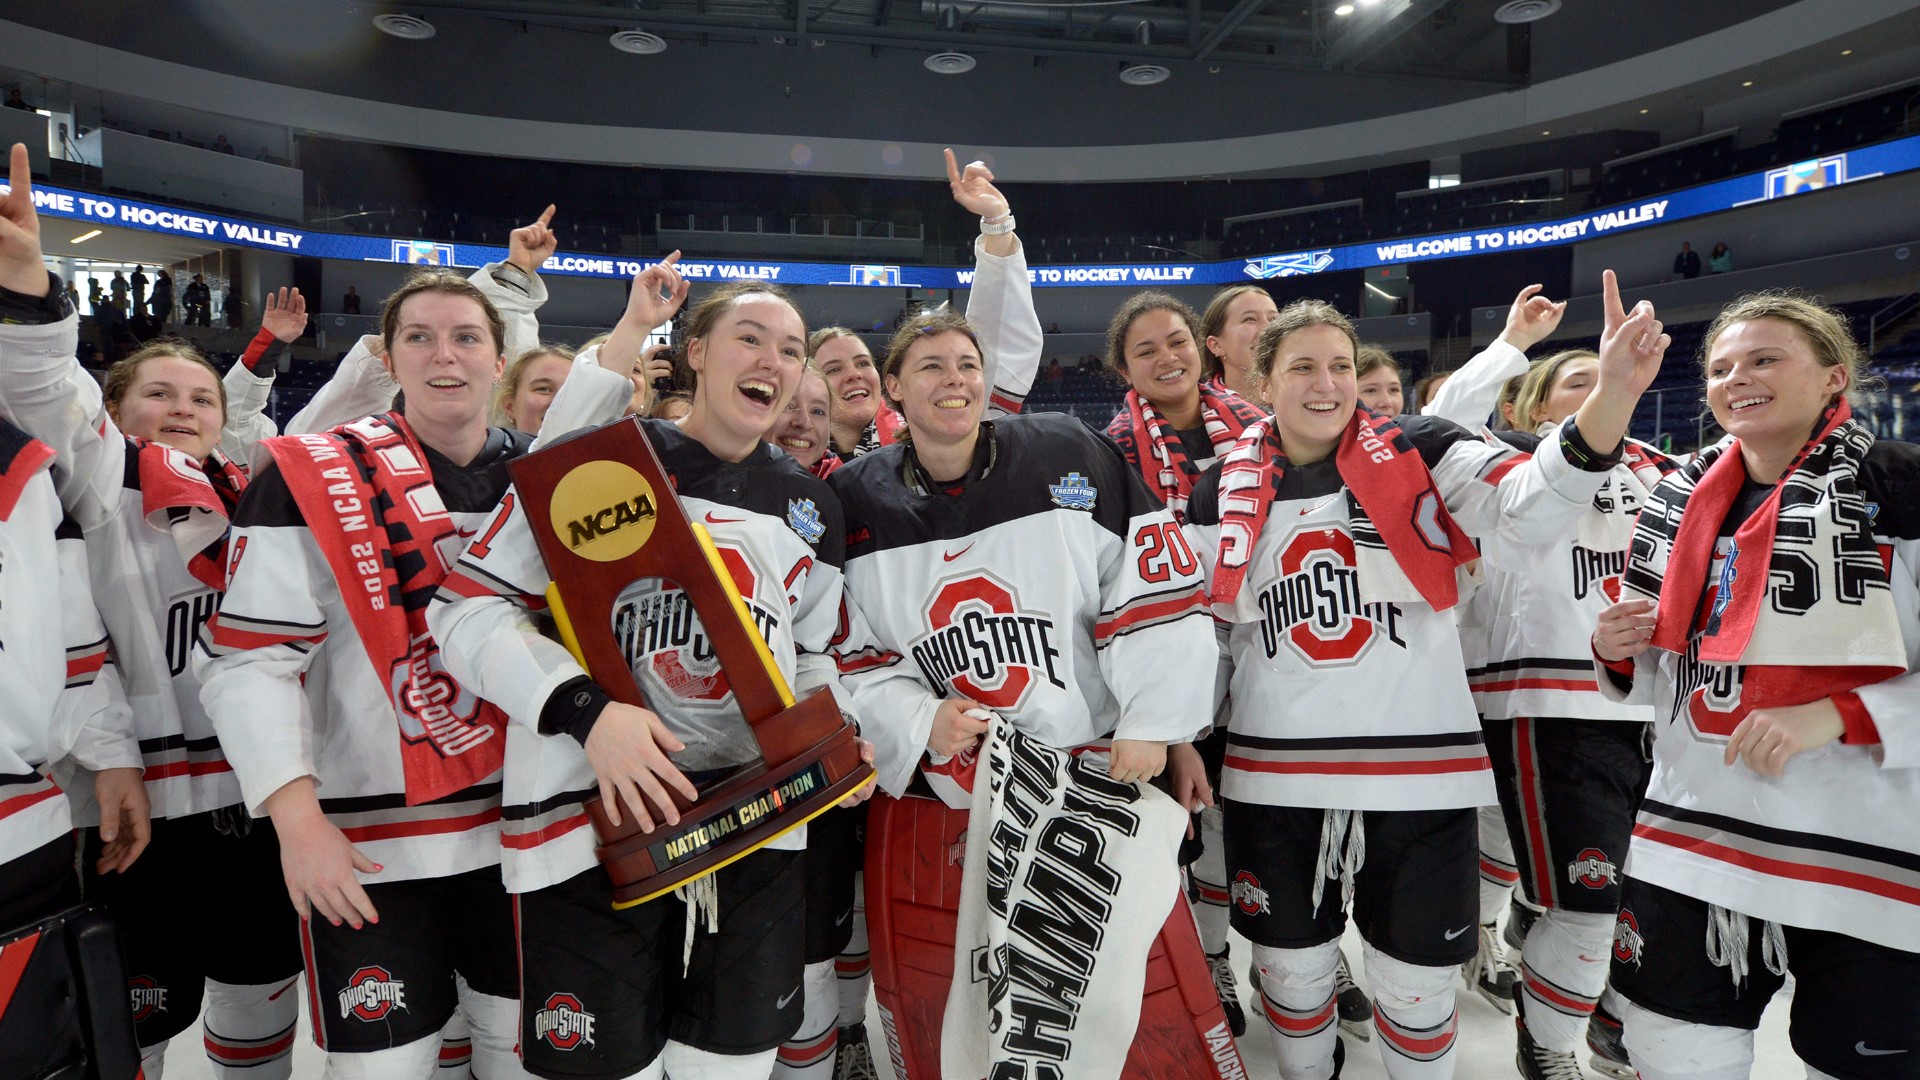 Athletes, coaches hope Ohio States national championship win paves the way to grow womens hockey 10tv